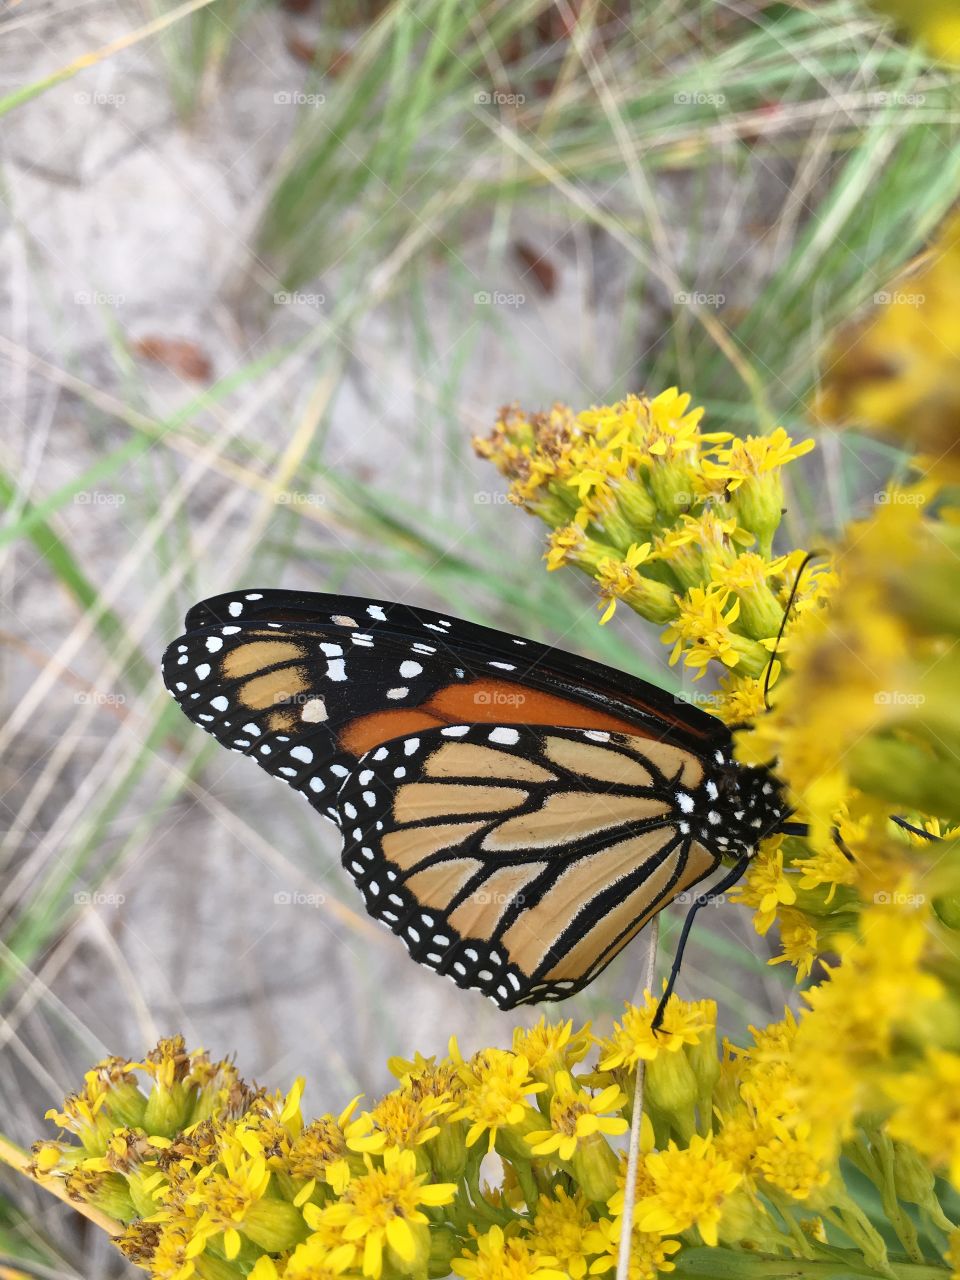 Monarch butterfly at the beach